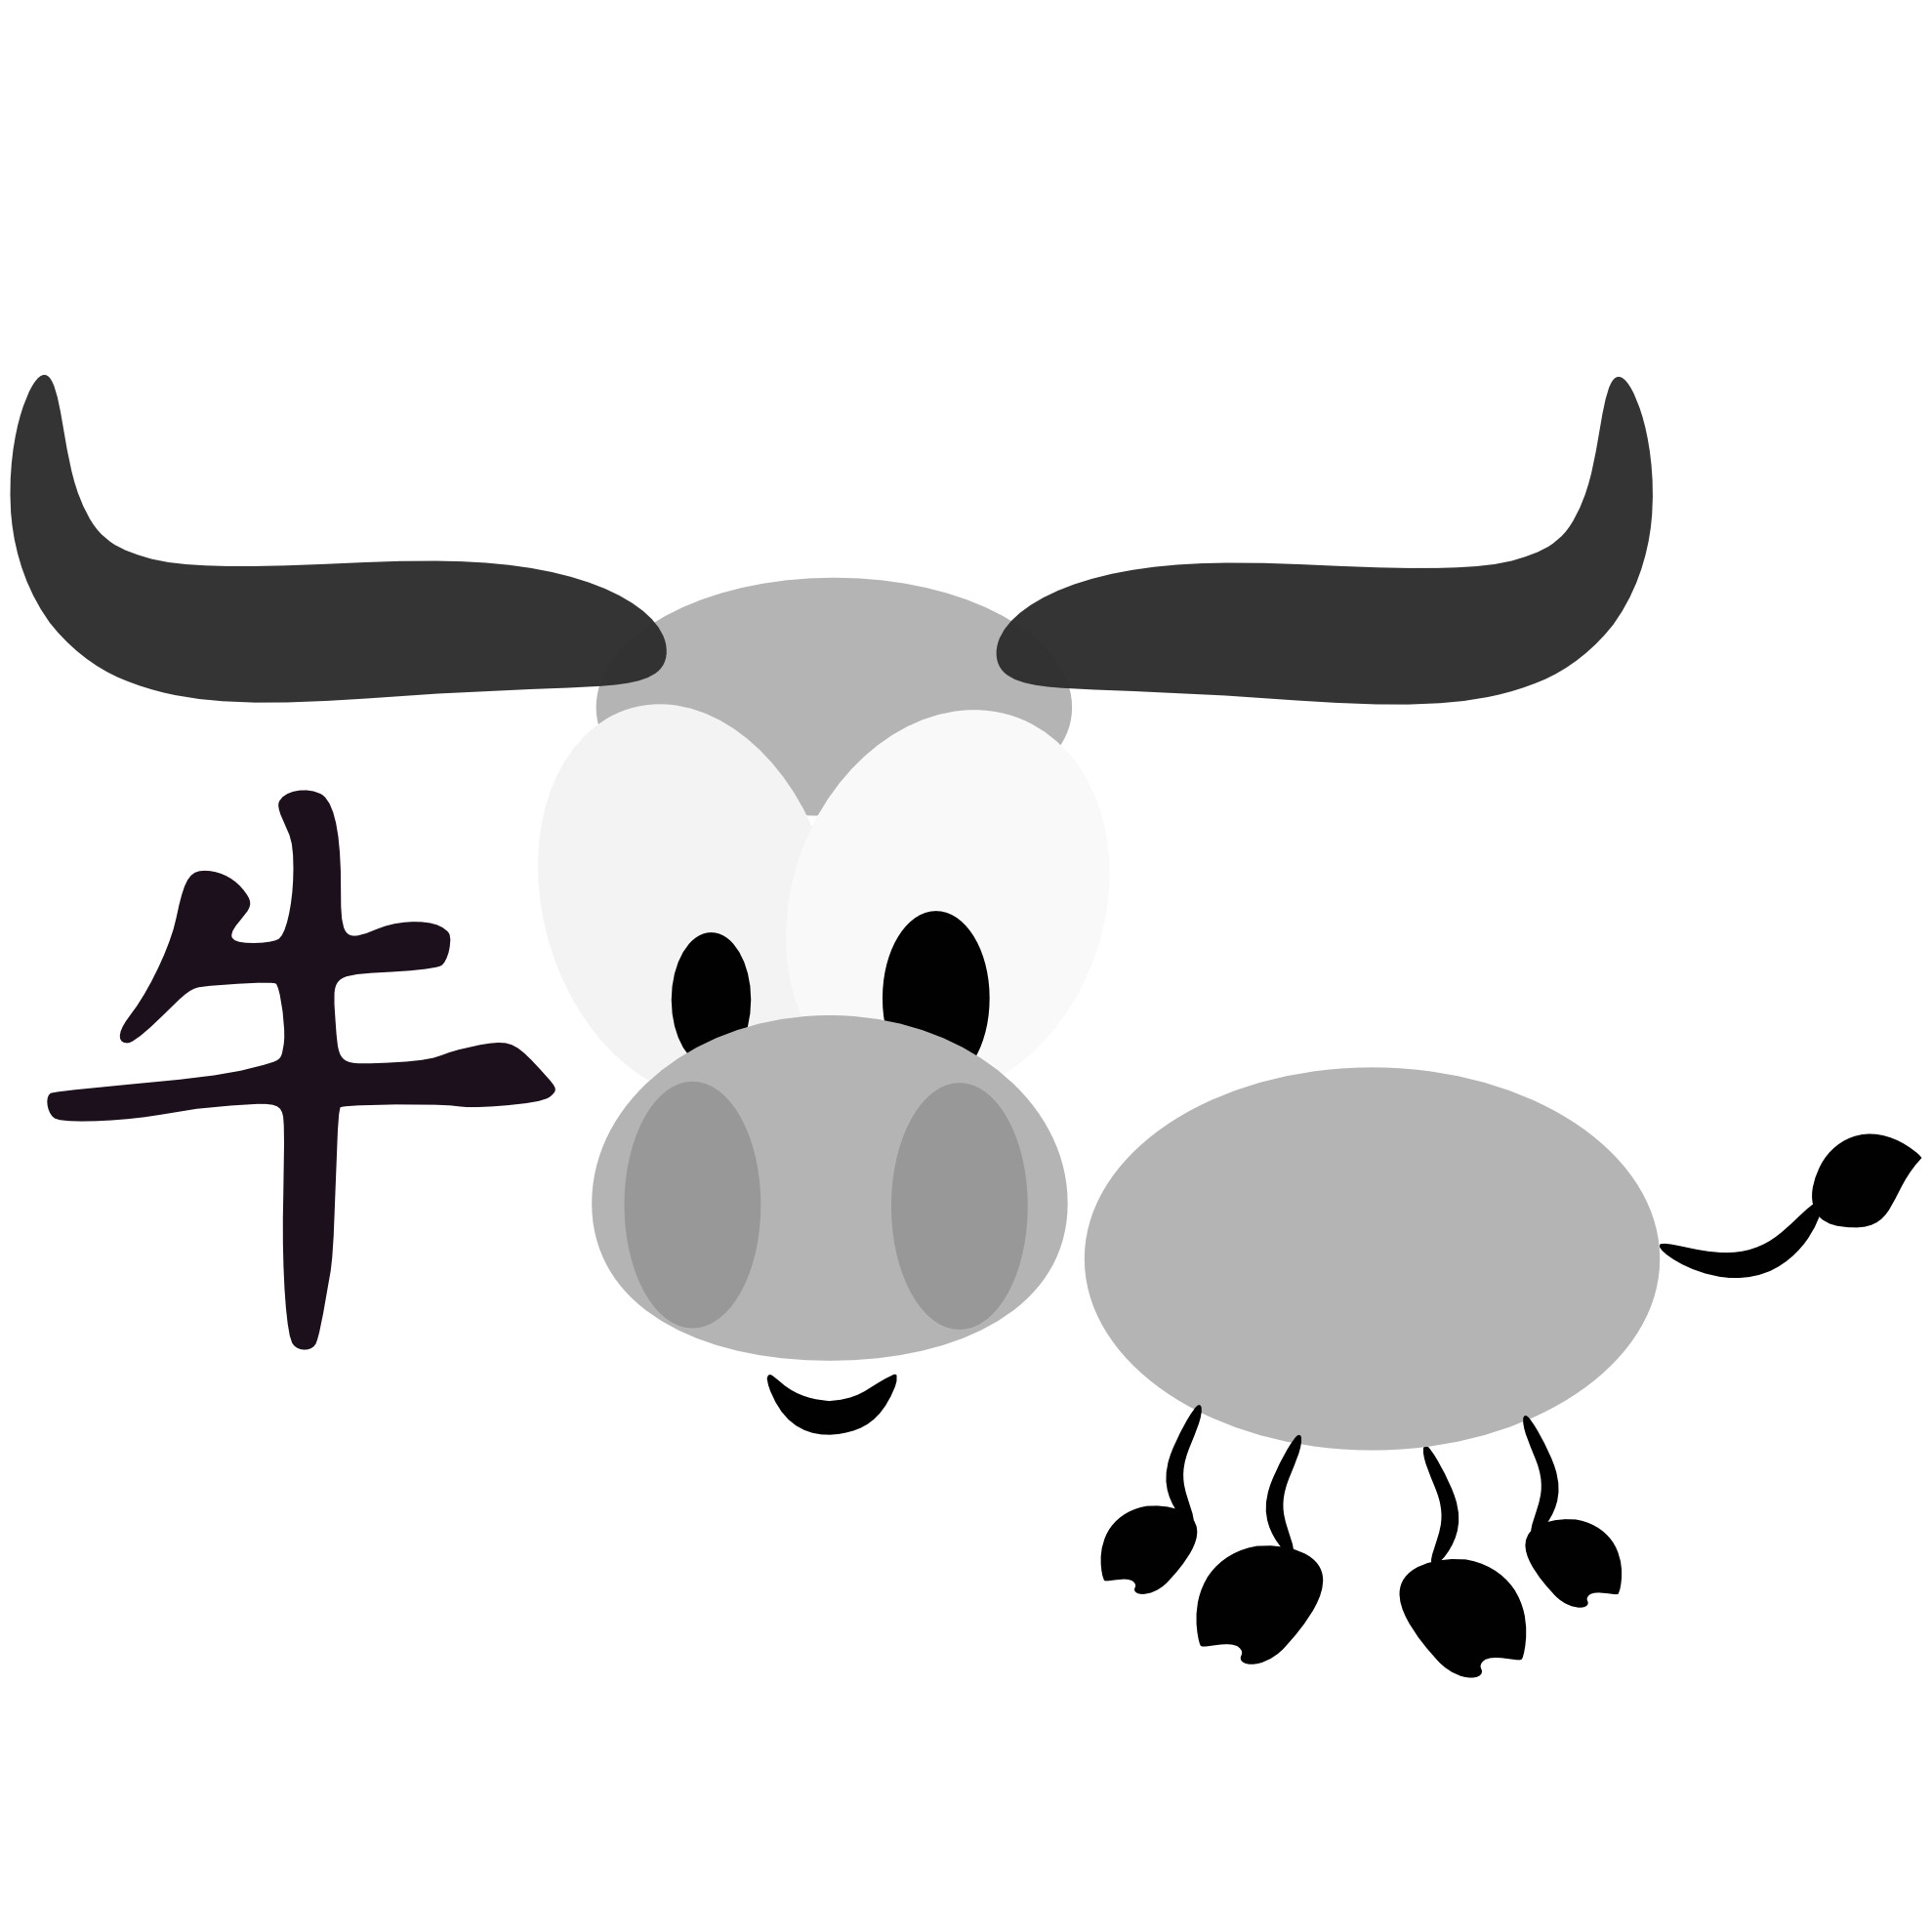 Chinese Horoscope Ox Sign Character Clipart icons